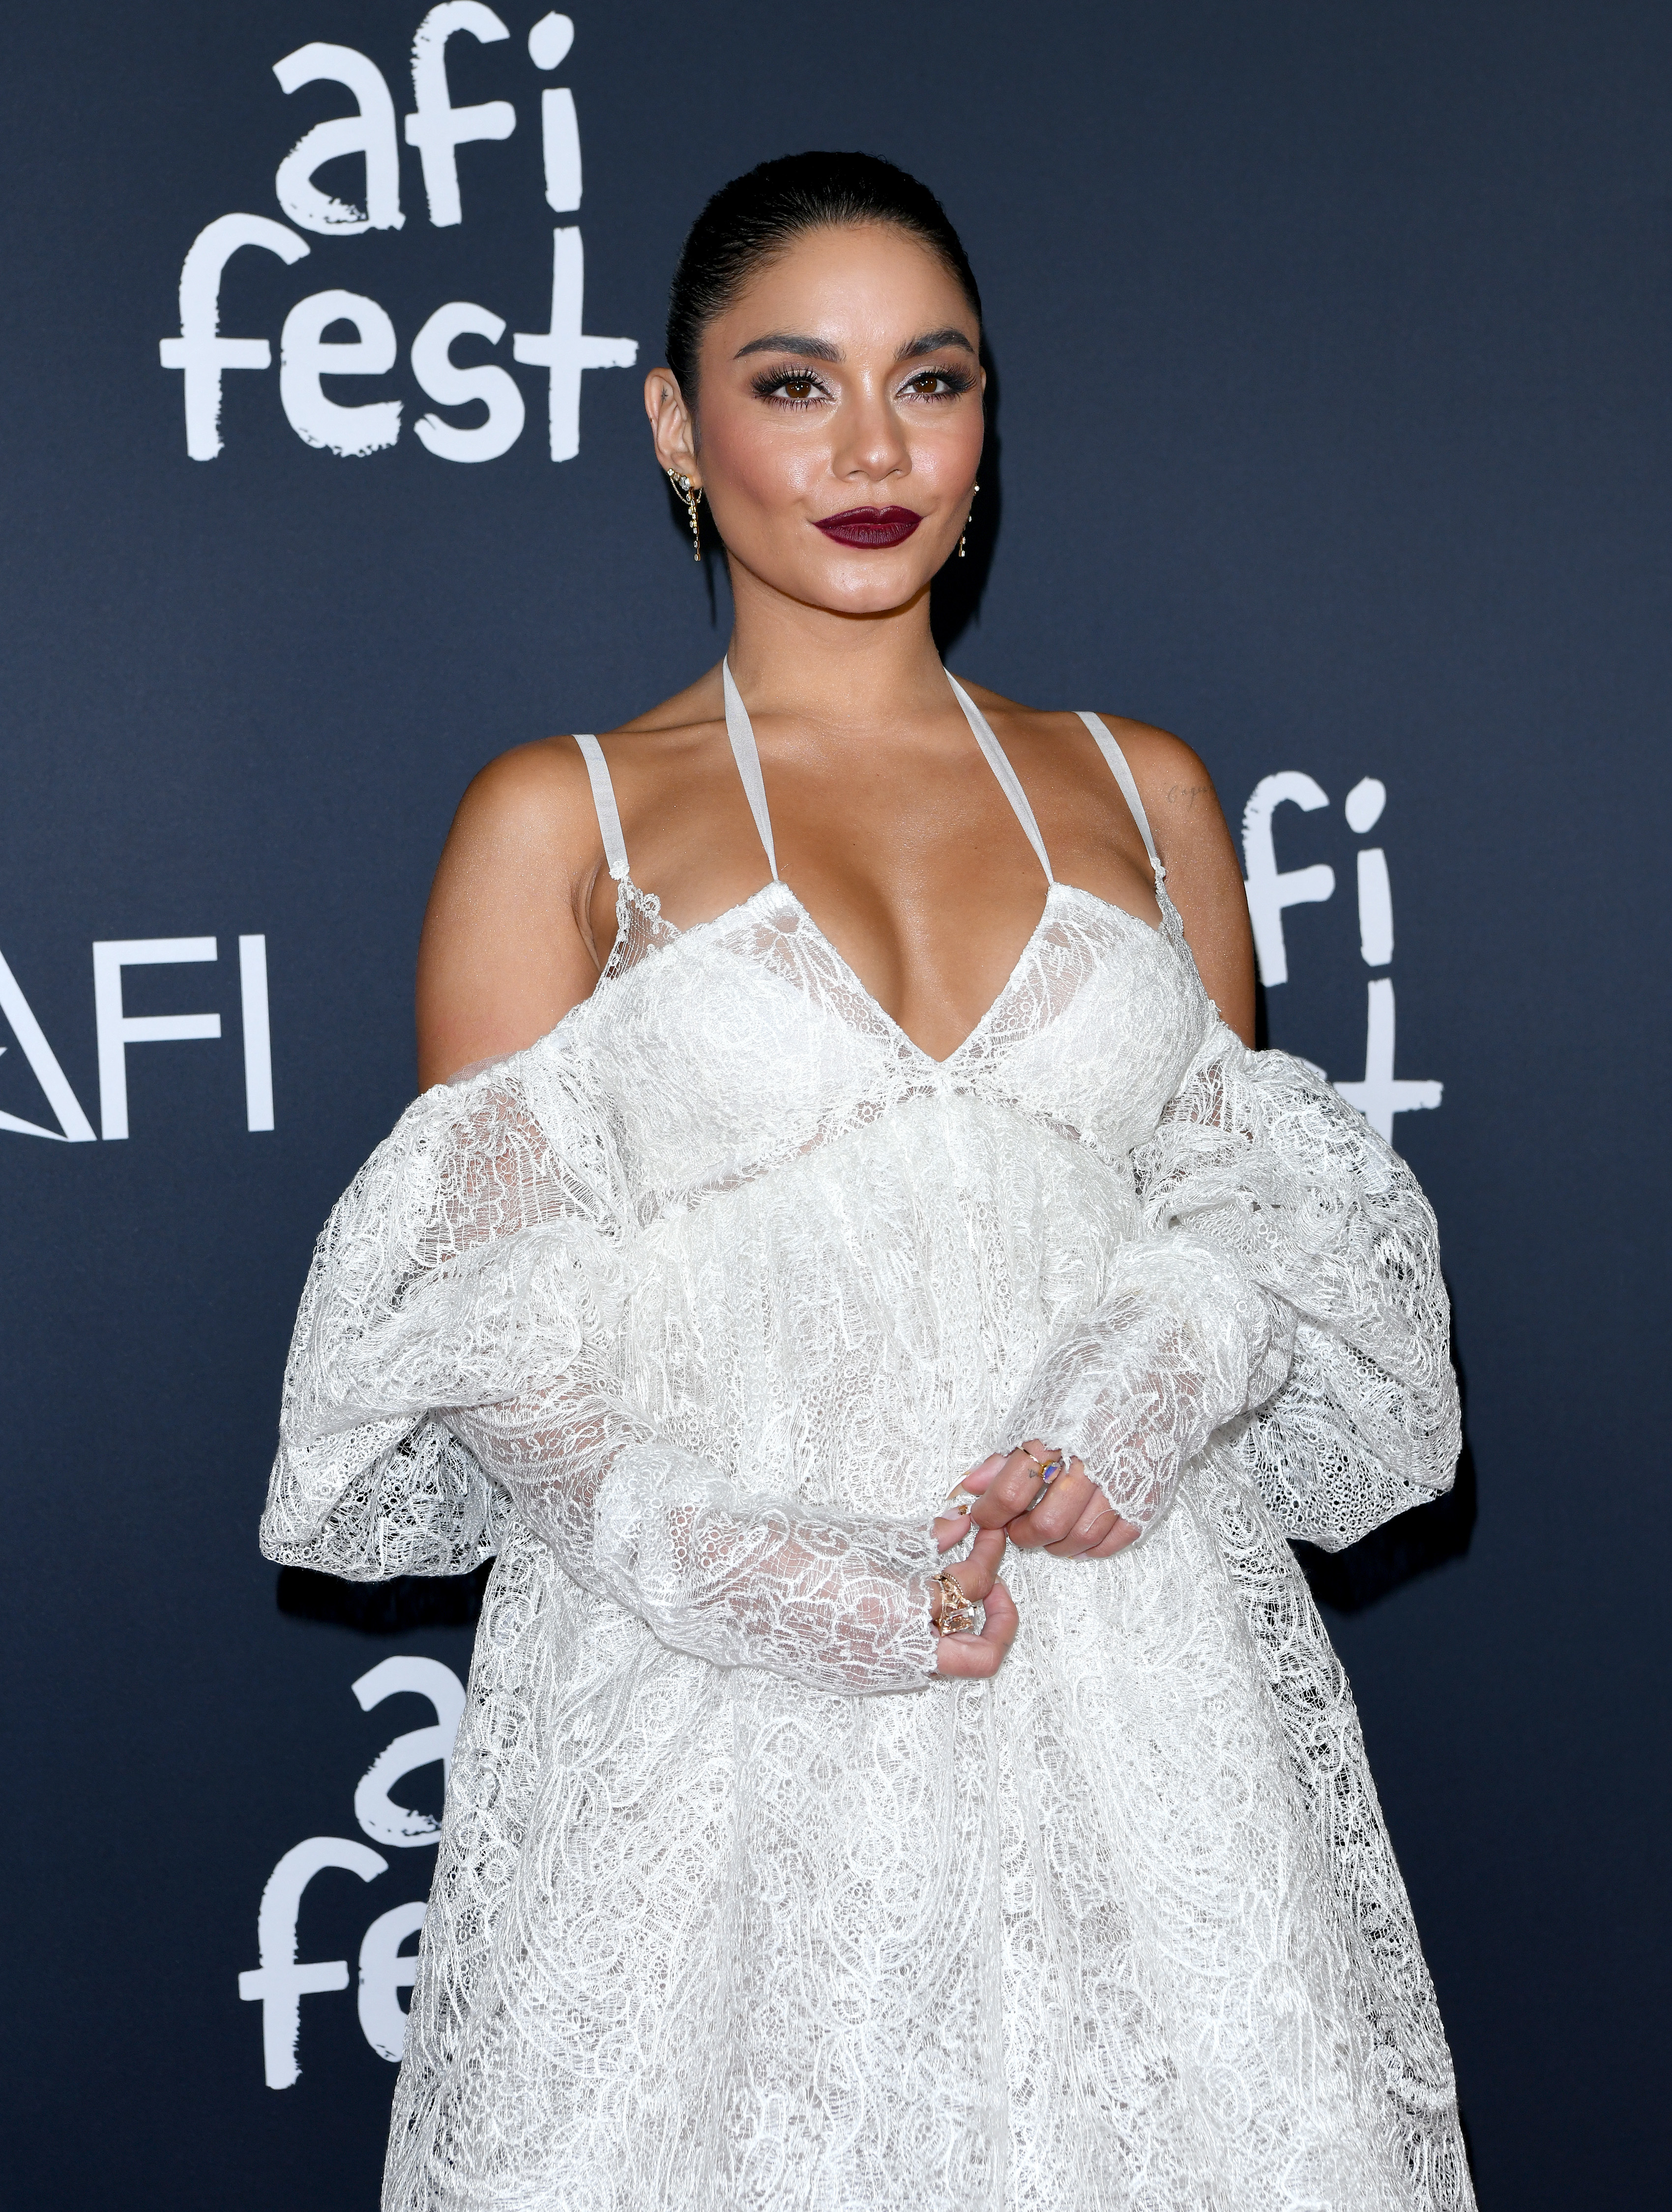 Close-up of Vanessa in a long, off-the-shoulder lacy dress at a media event